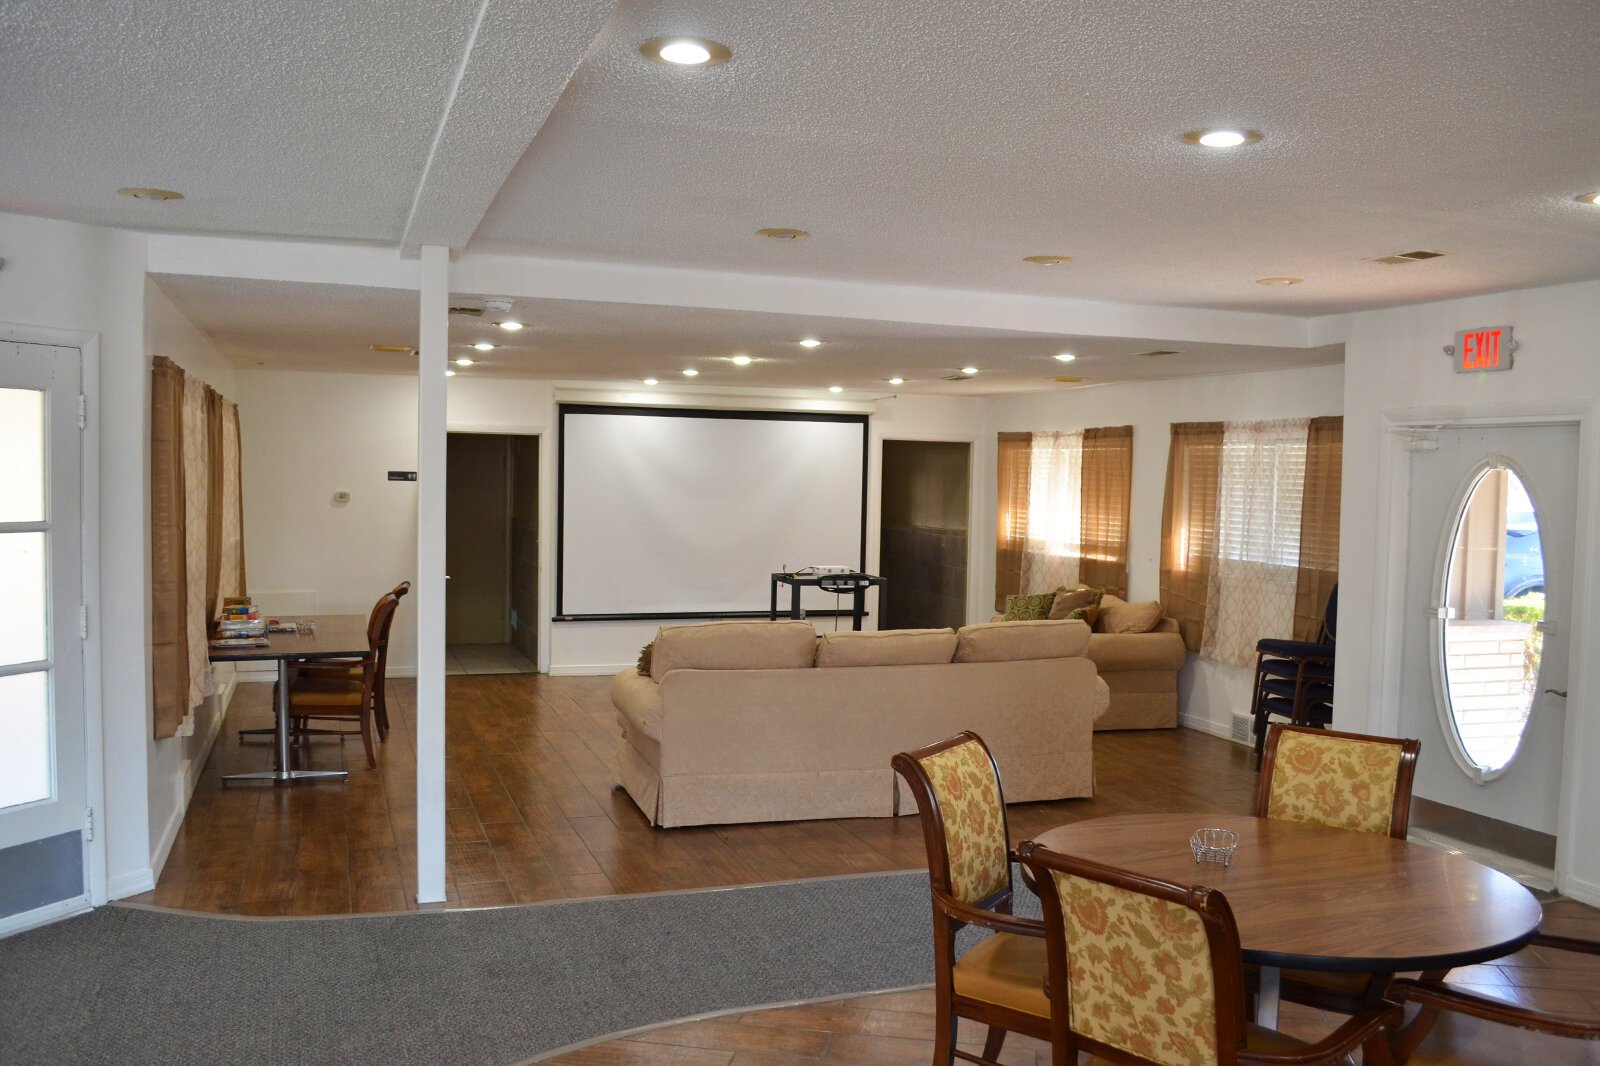 The main area of Thrive features comfy couches, tables to play games and eat, and a projector.